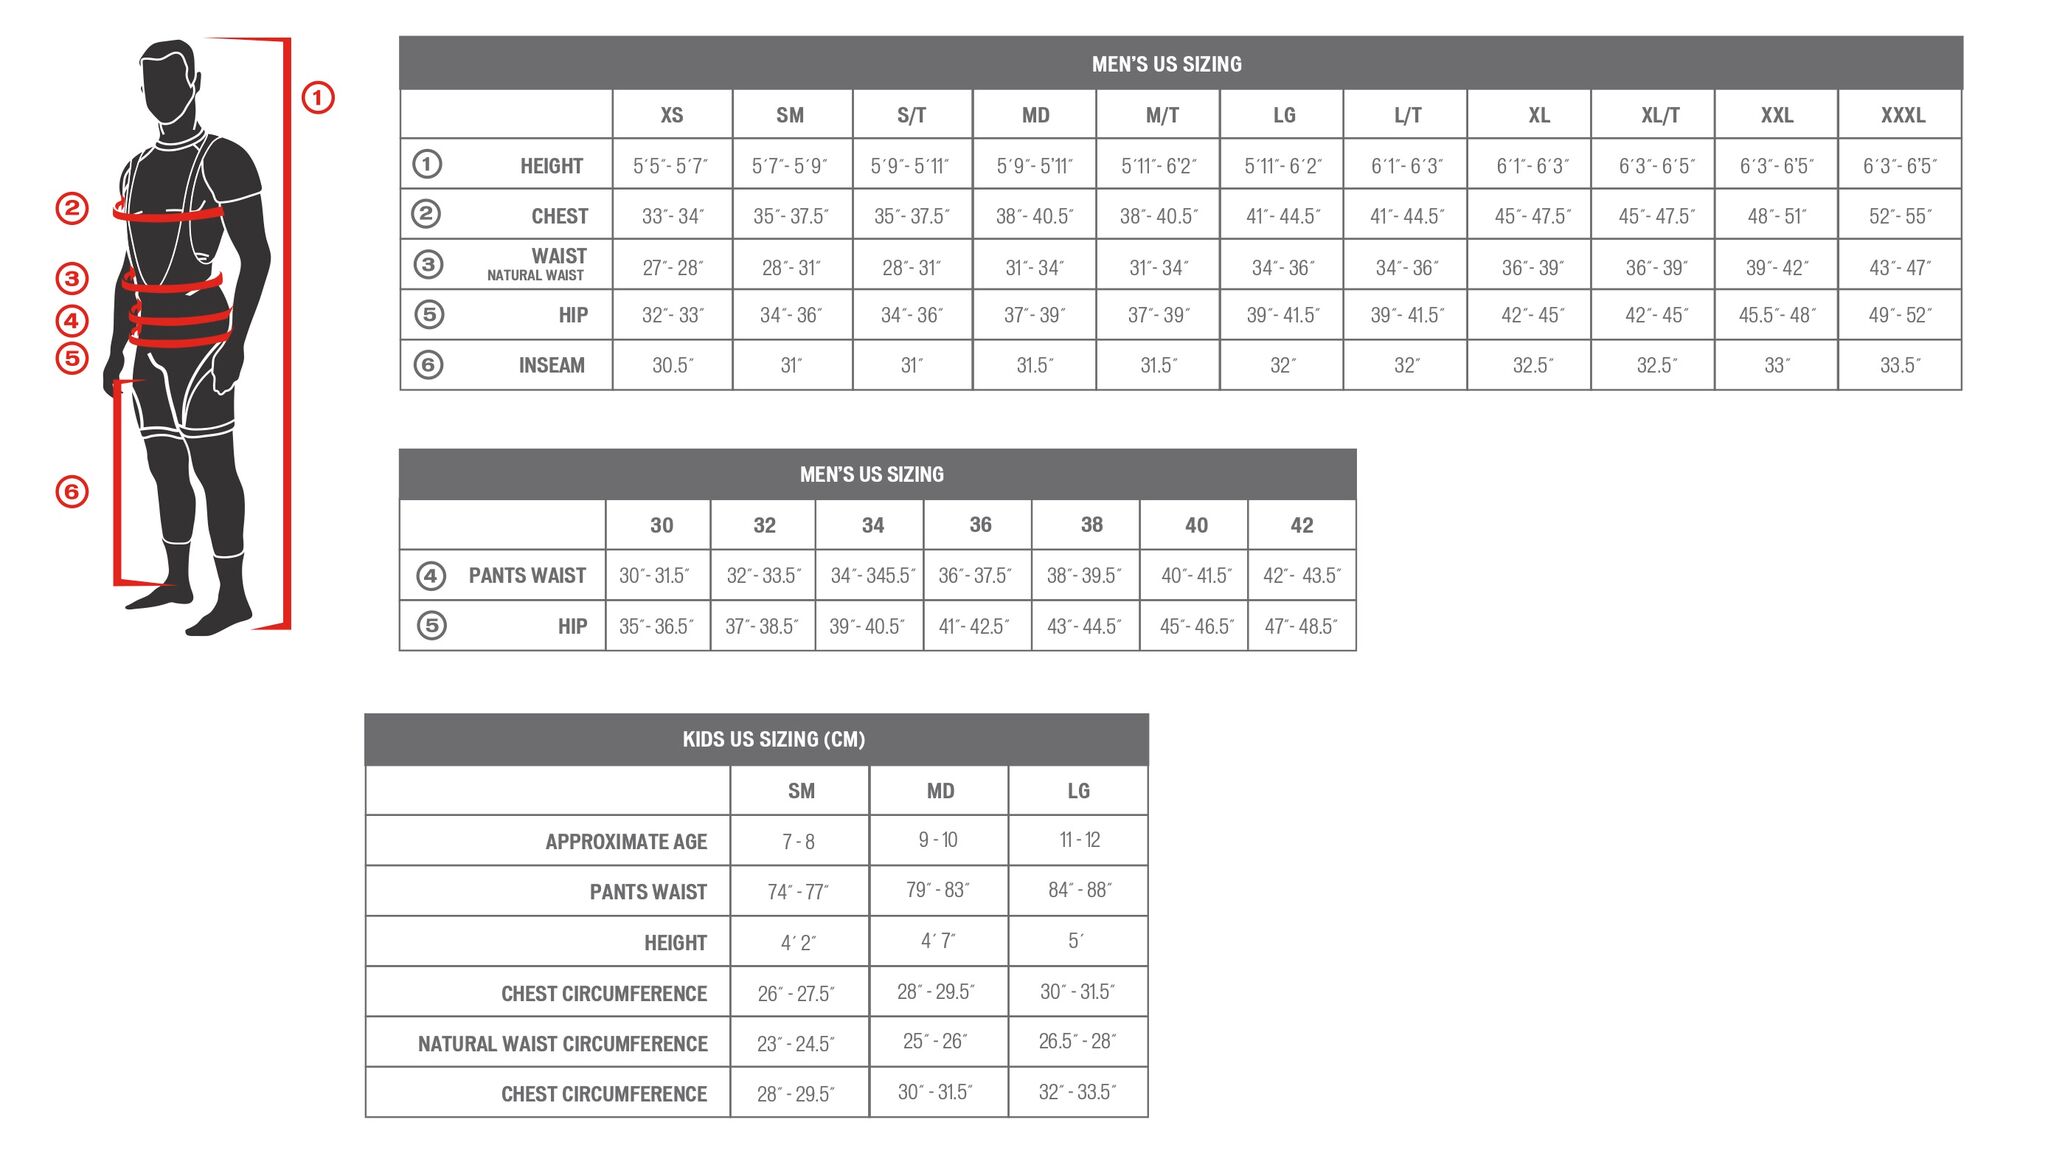 Specialized men's sizing chart